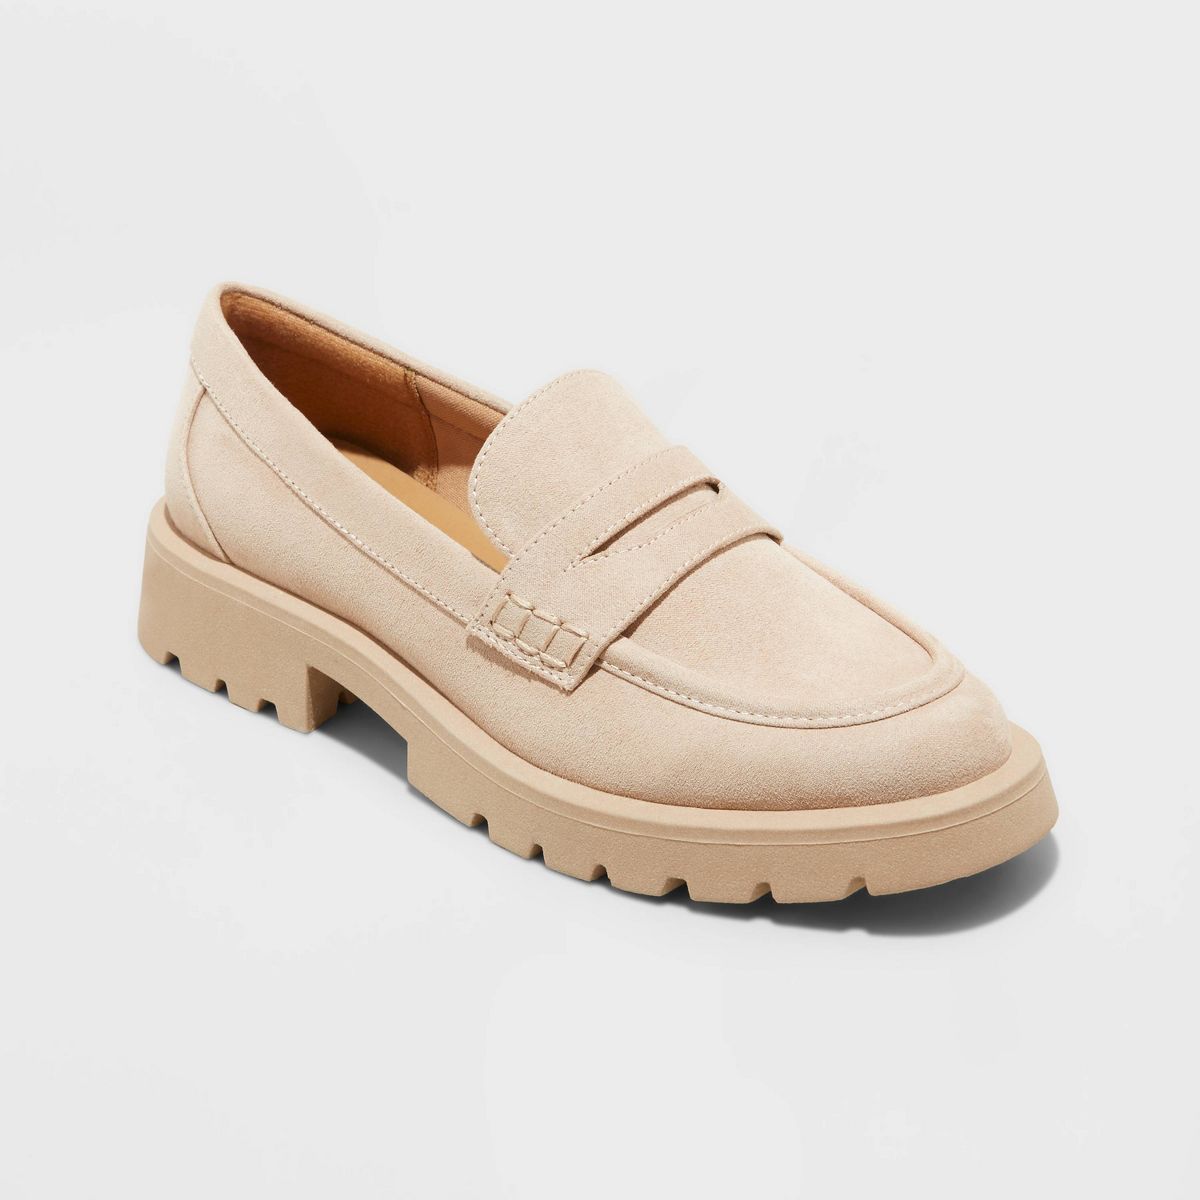 Women's Archie Loafer Flats - A New Day™ | Target